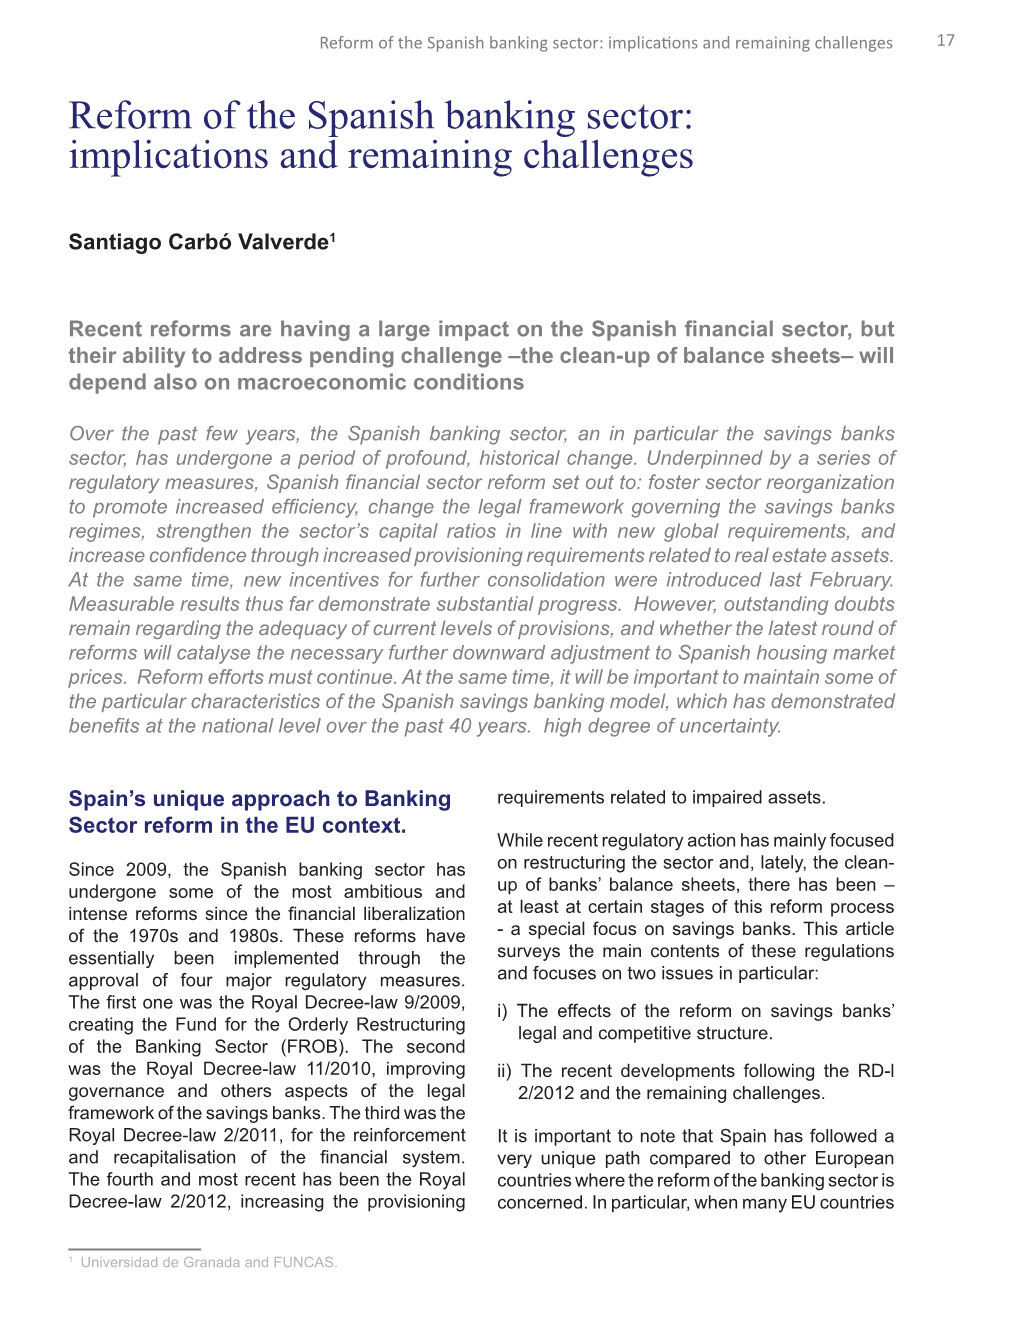 Reform of the Spanish Banking Sector: Implications and Remaining Challenges 17